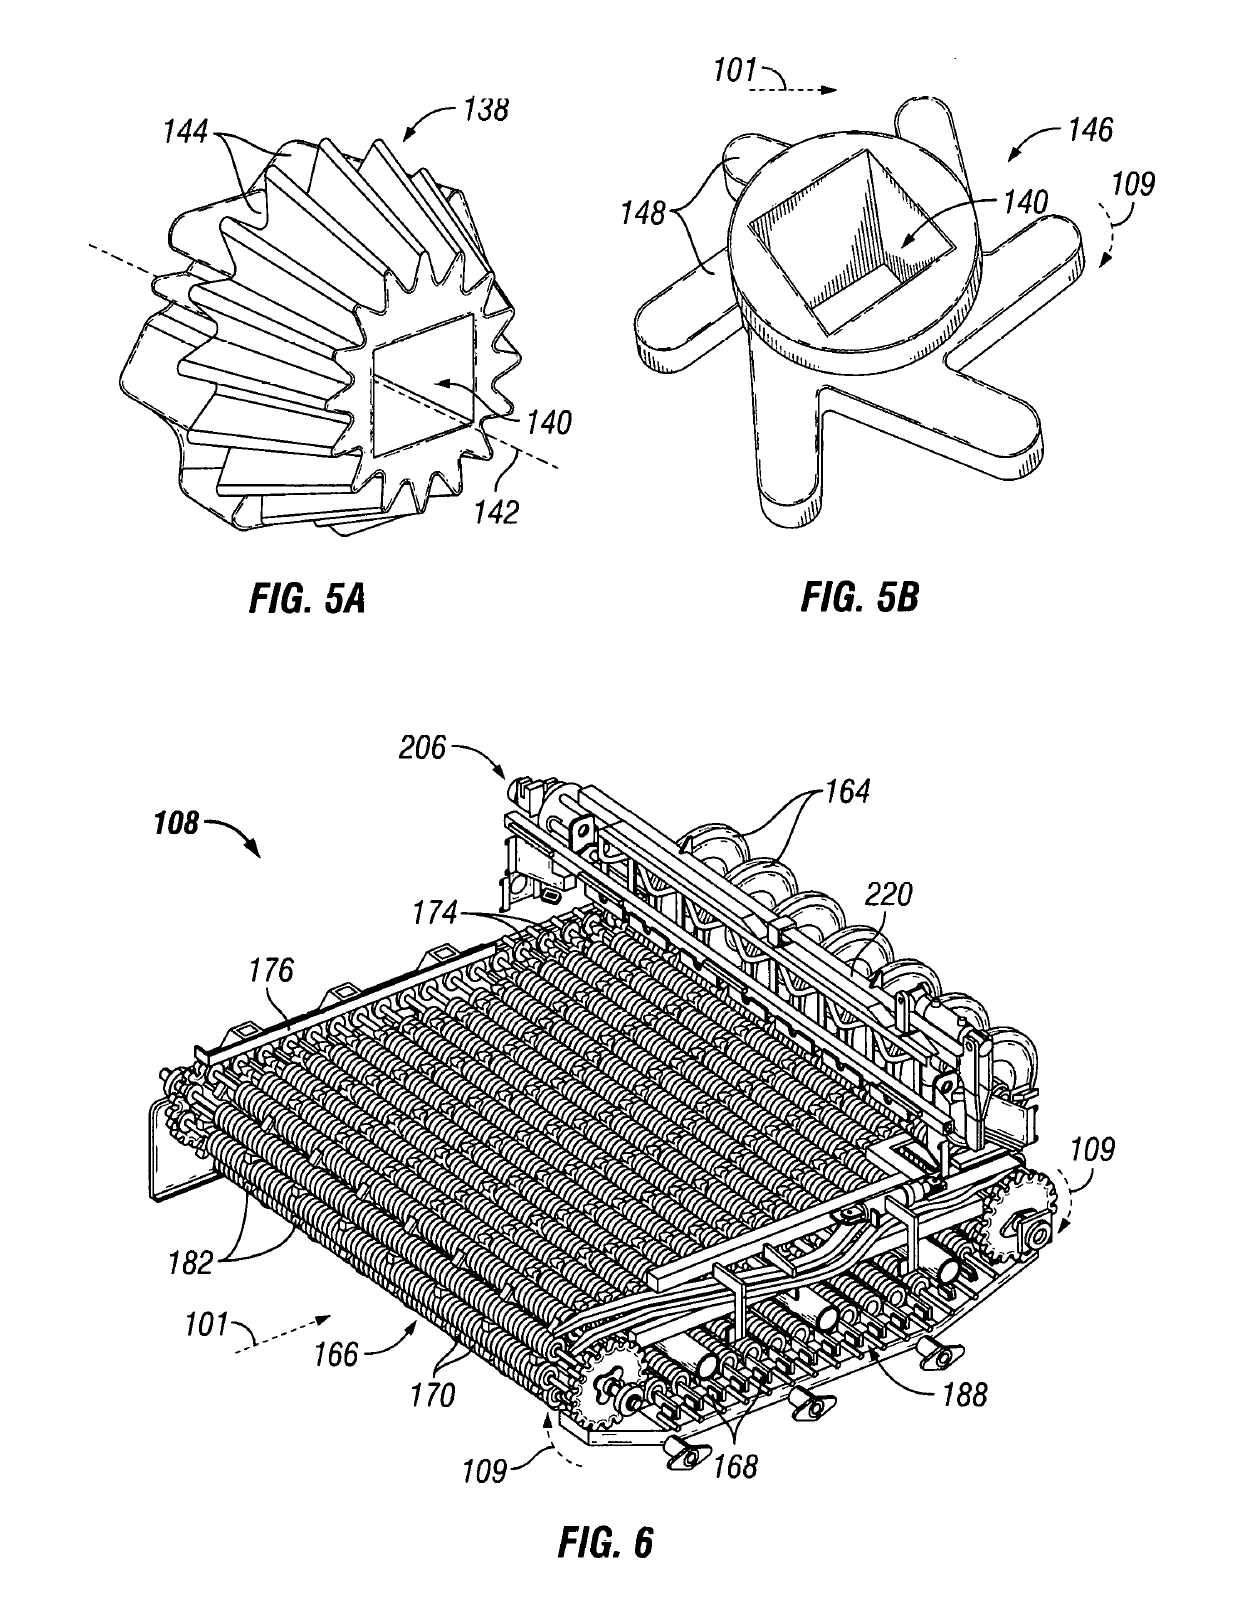 Seed potato cutting system with potato positioning mechanism